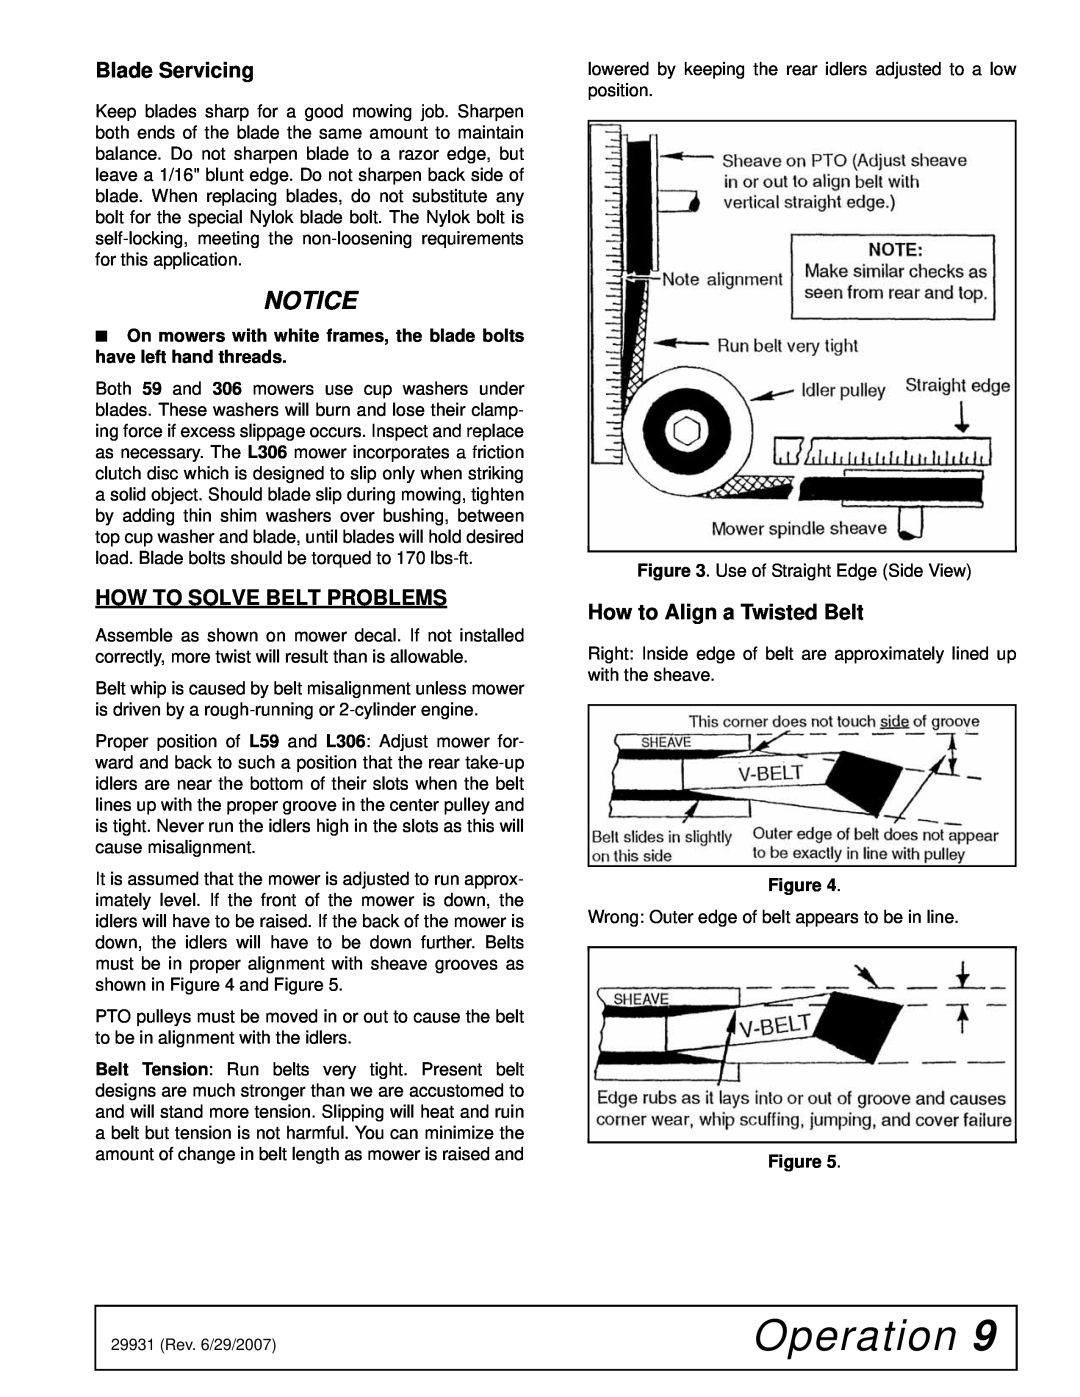 Woods Equipment 59HC-1 manual Blade Servicing, How To Solve Belt Problems, How to Align a Twisted Belt, Operation 